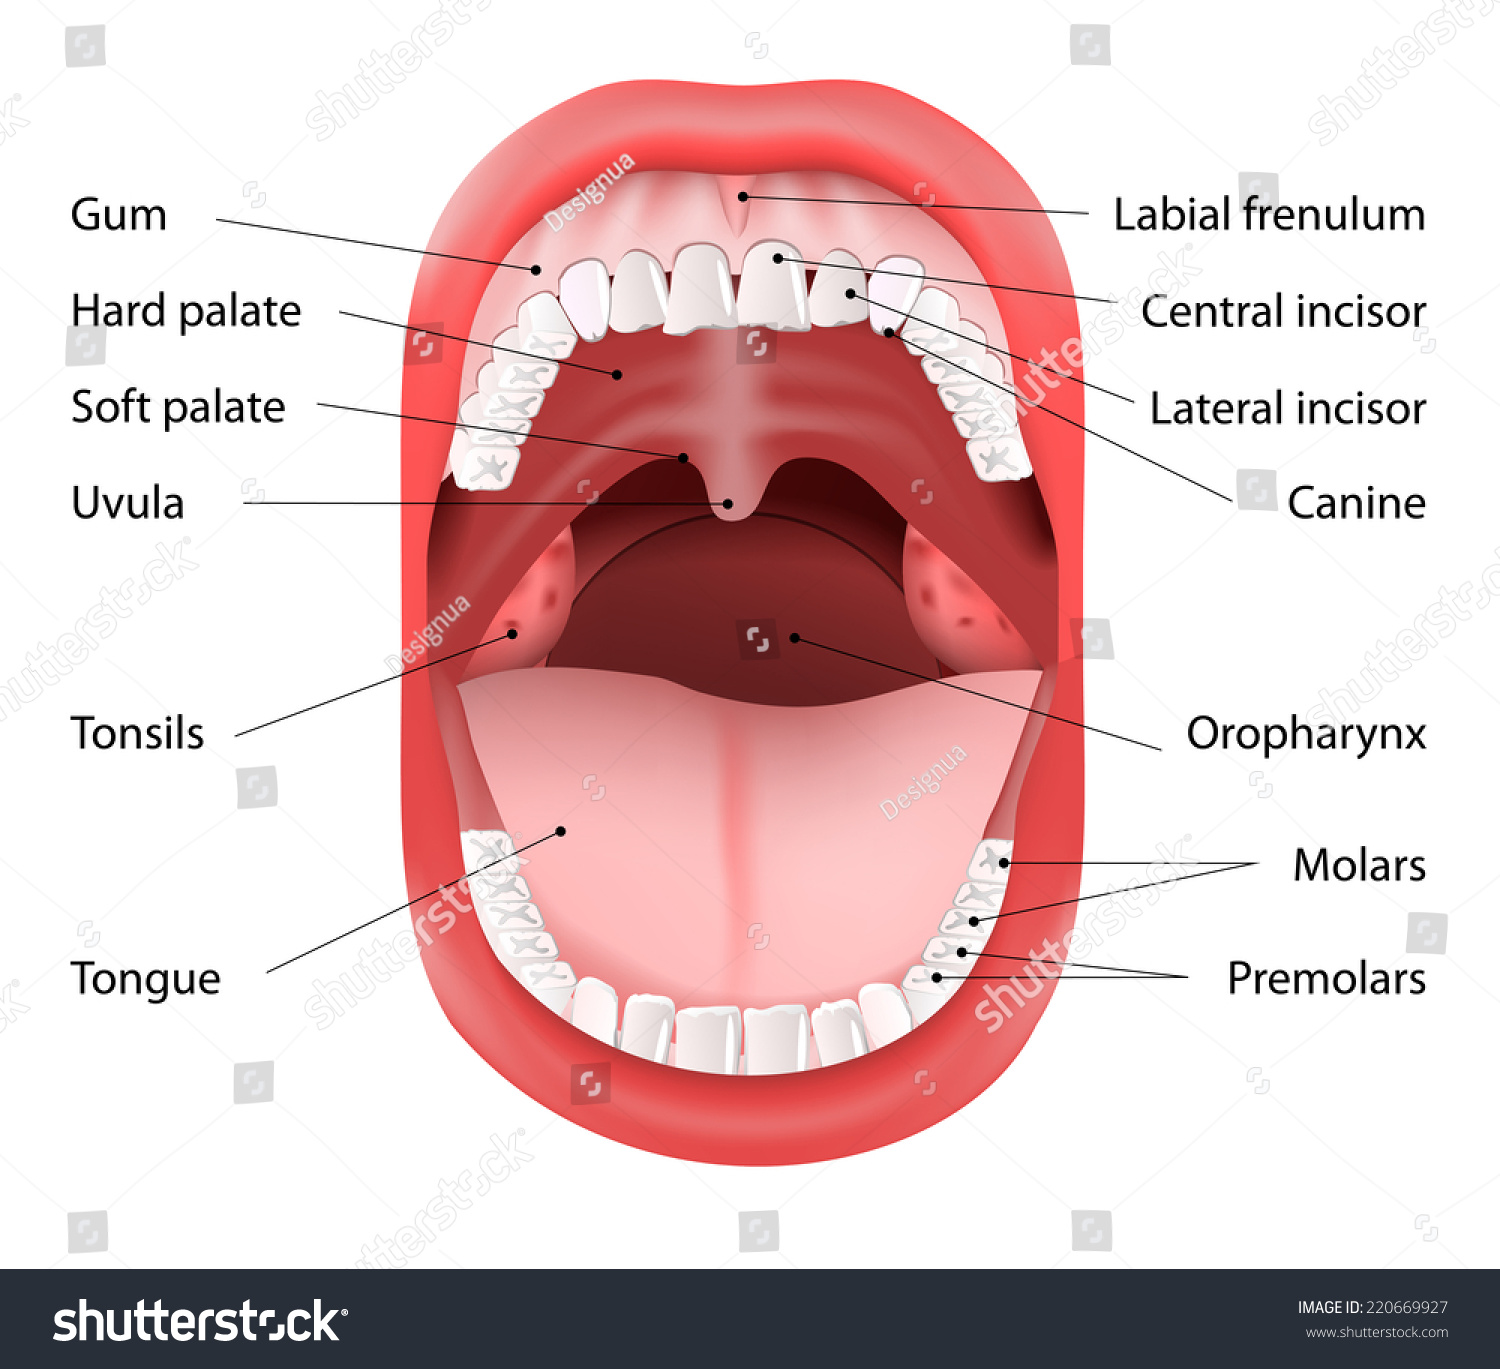 How Many Teeth Are In A Human Mouth 12